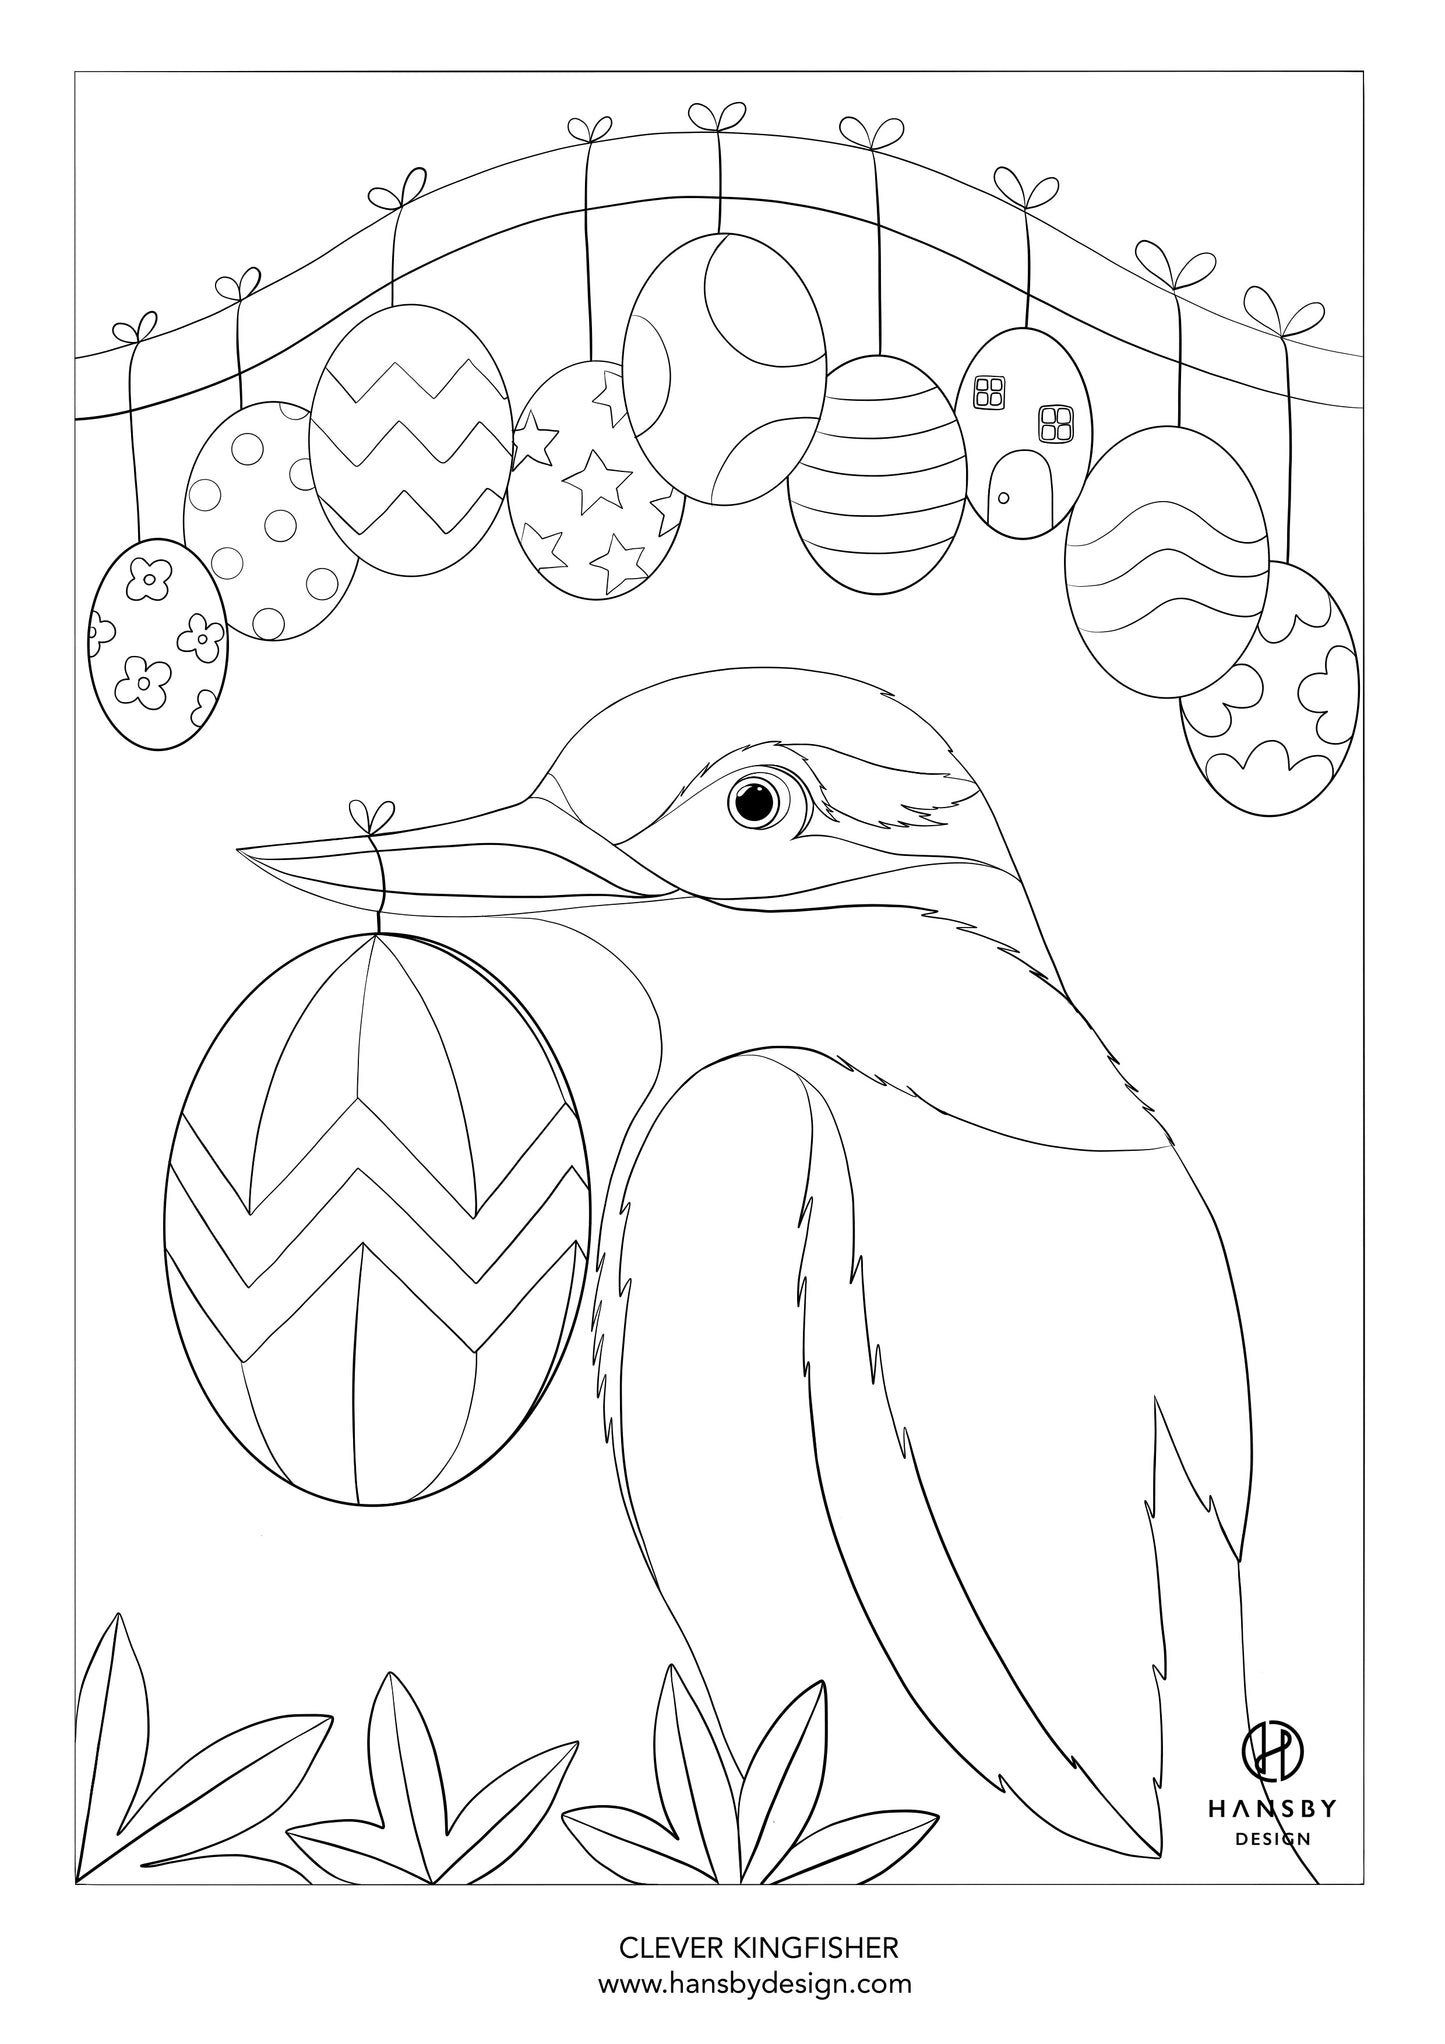 Colouring in page of the Kingfisher, by New Zealand artist Hansby Design